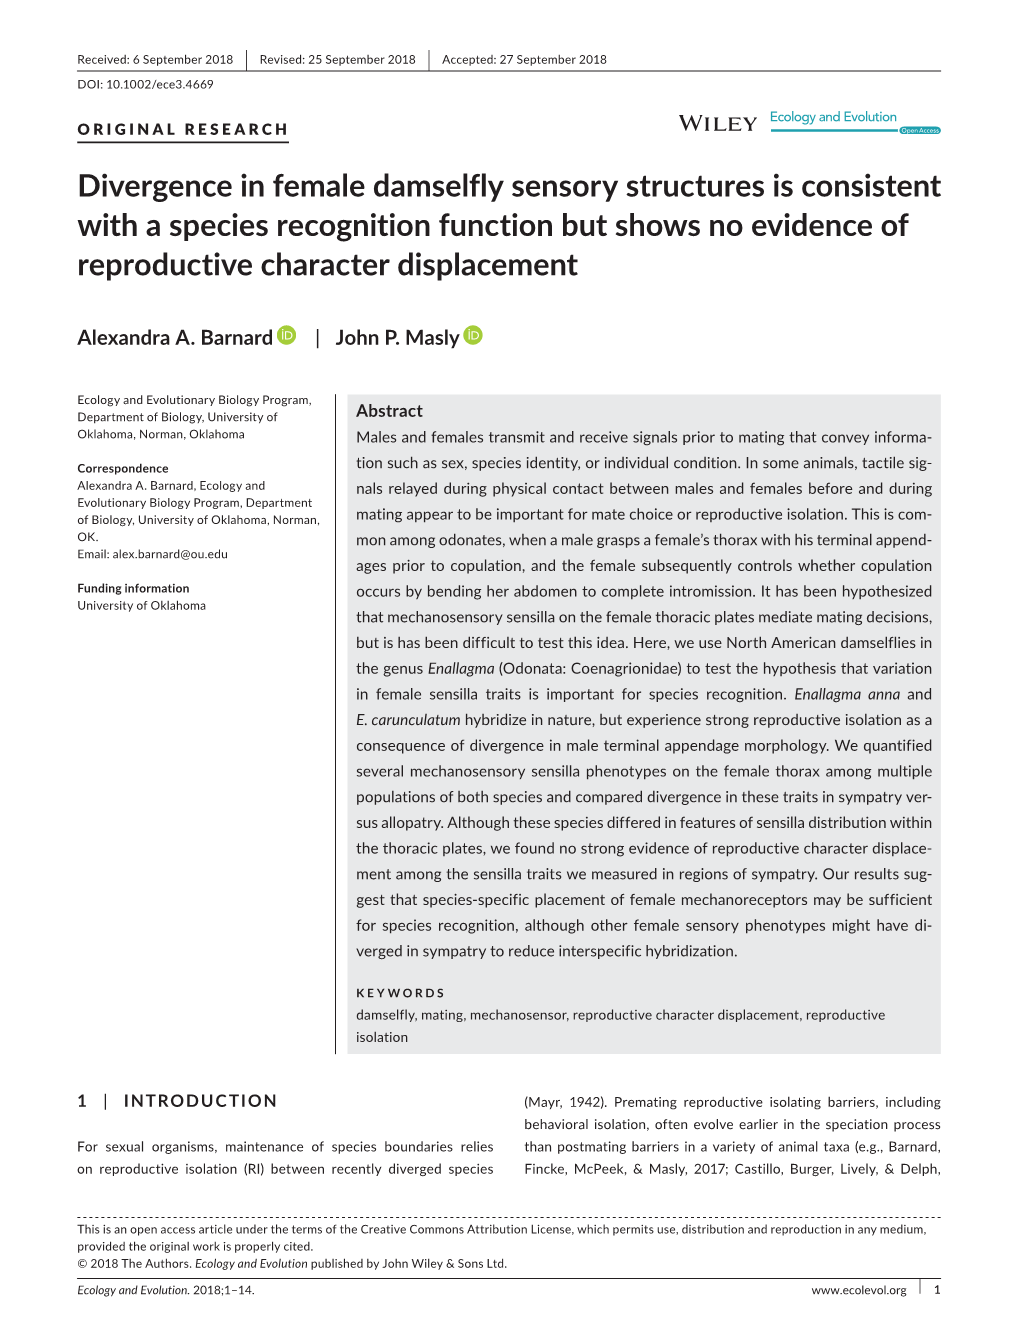 Divergence in Female Damselfly Sensory Structures Is Consistent with a Species Recognition Function but Shows No Evidence of Reproductive Character Displacement